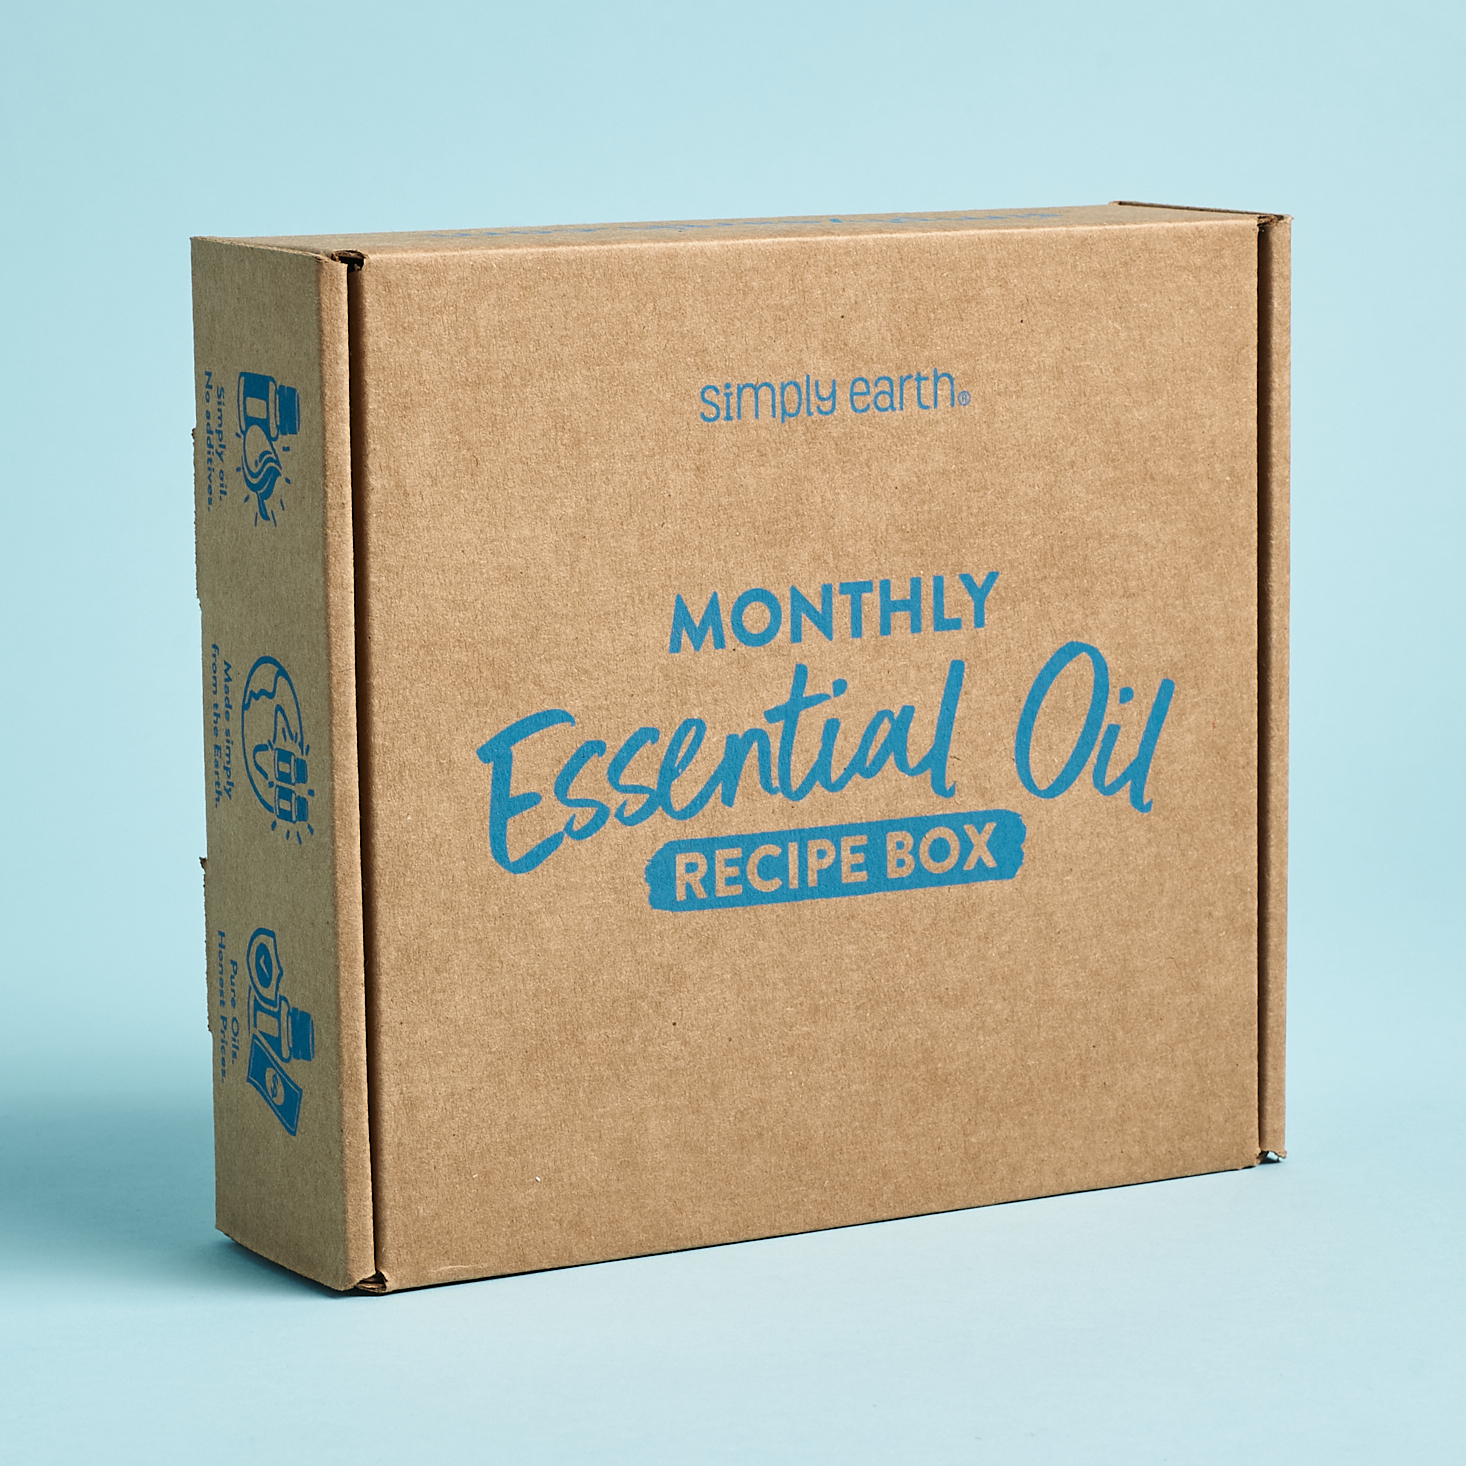 The monthly Simply Earth Essential Oil Box that was packed within the Big Box this month